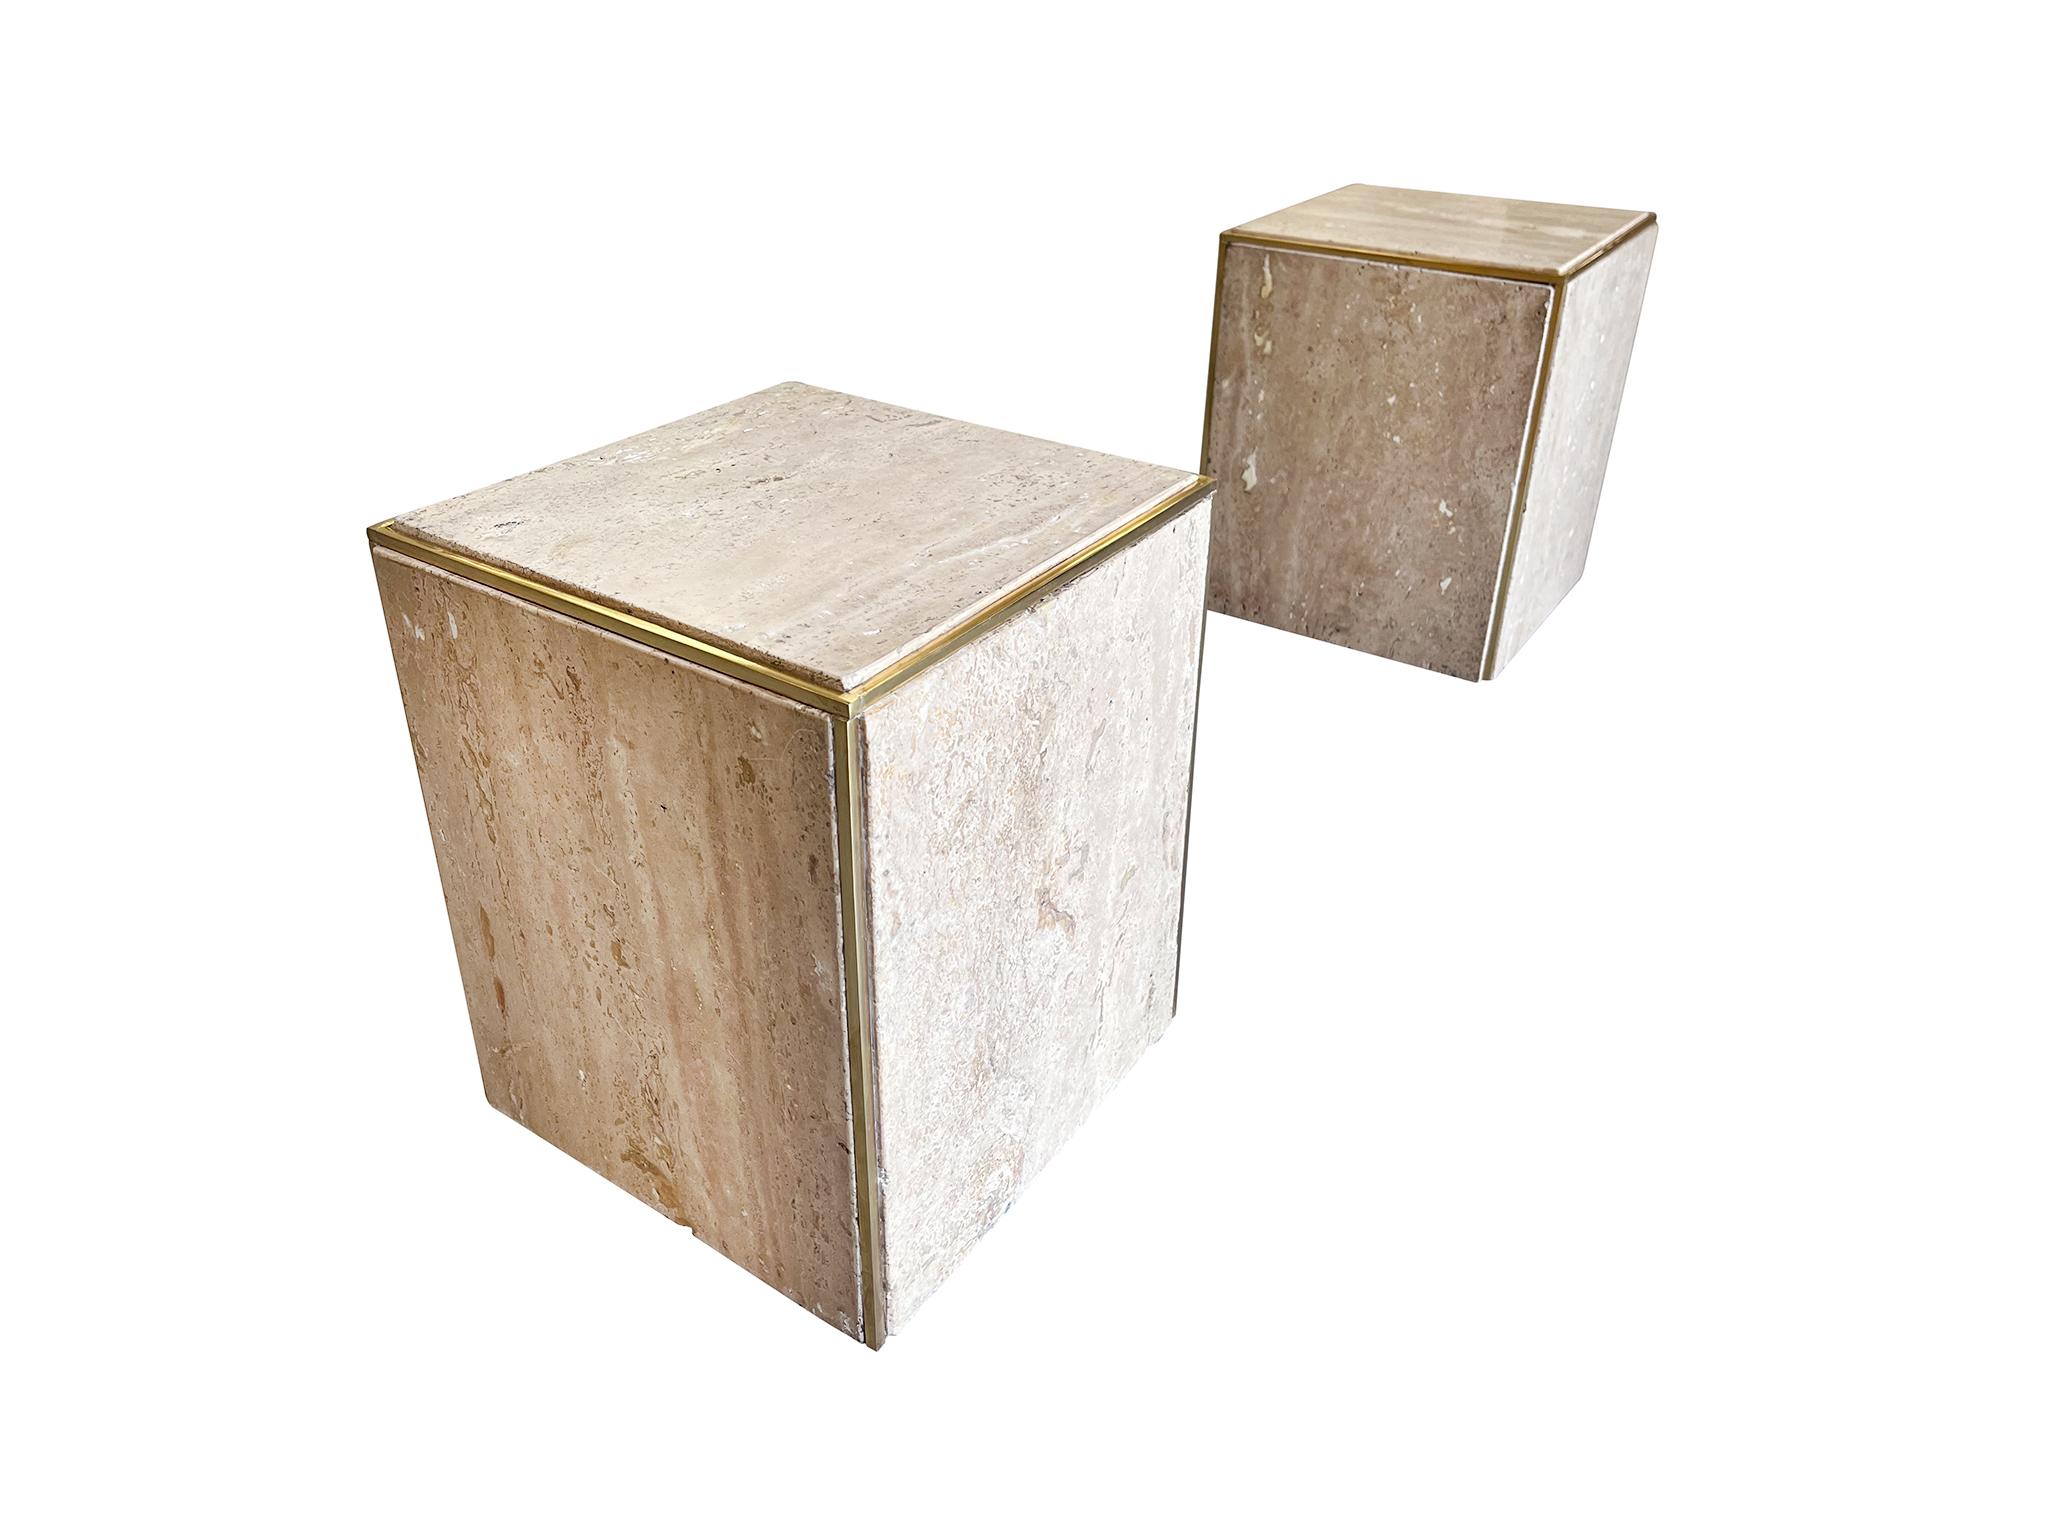 A pair of 1960s travertine cube side tables. The travertine has a subtle rose tint. Brass mounting follows the perimeter of the tables, creating a beautiful gold outline.

Dimensions:
13.5 in. width
13.5 in. depth
16 in. height

Condition